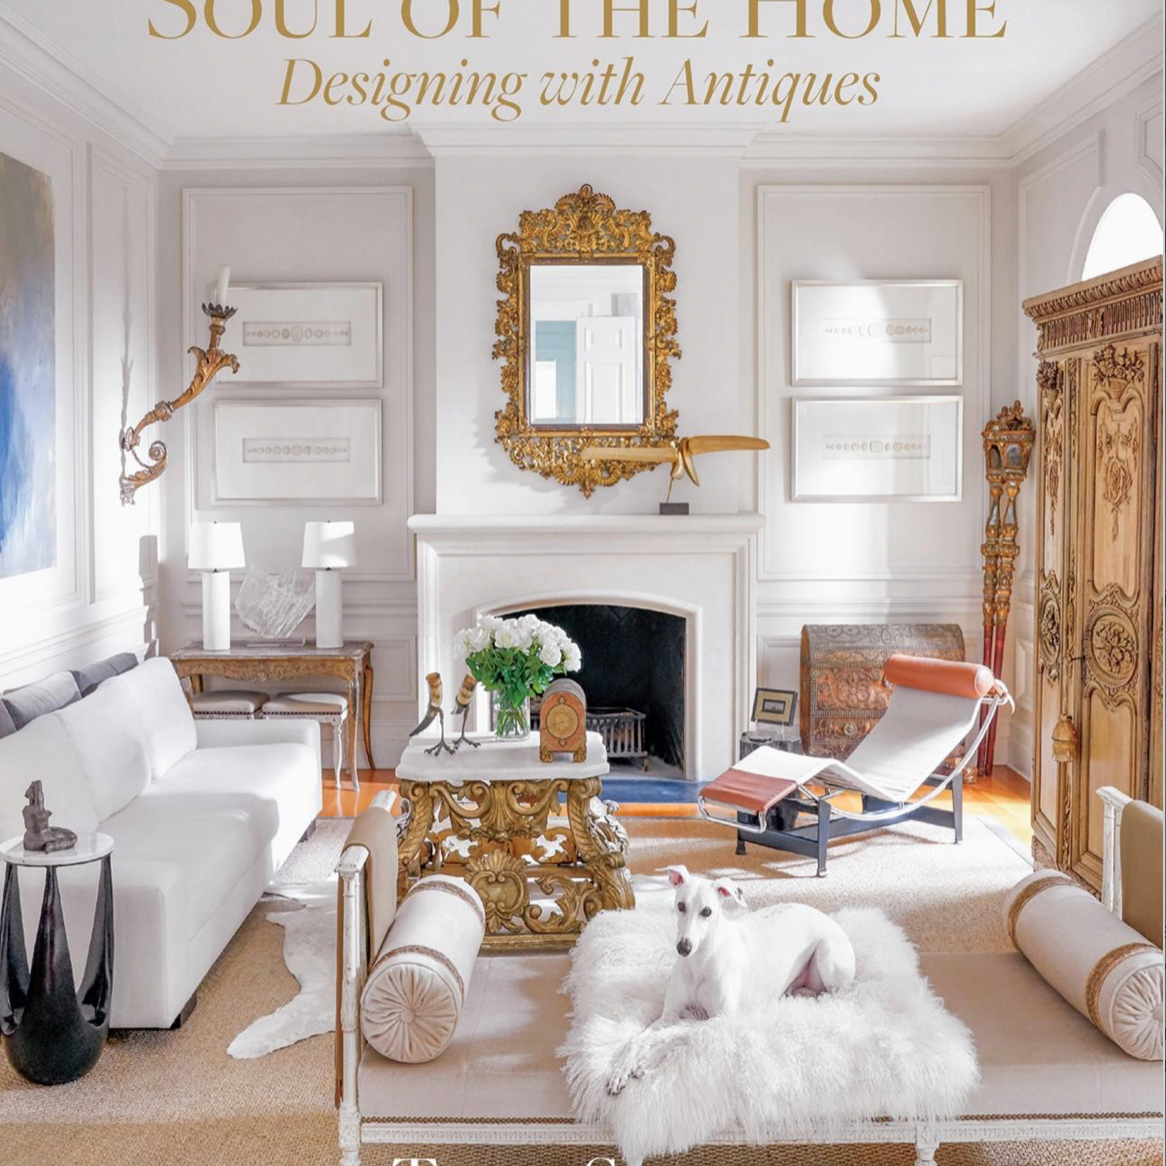 Book, Soul of the Home - Designing with Antiques - Danshire Market and Design 